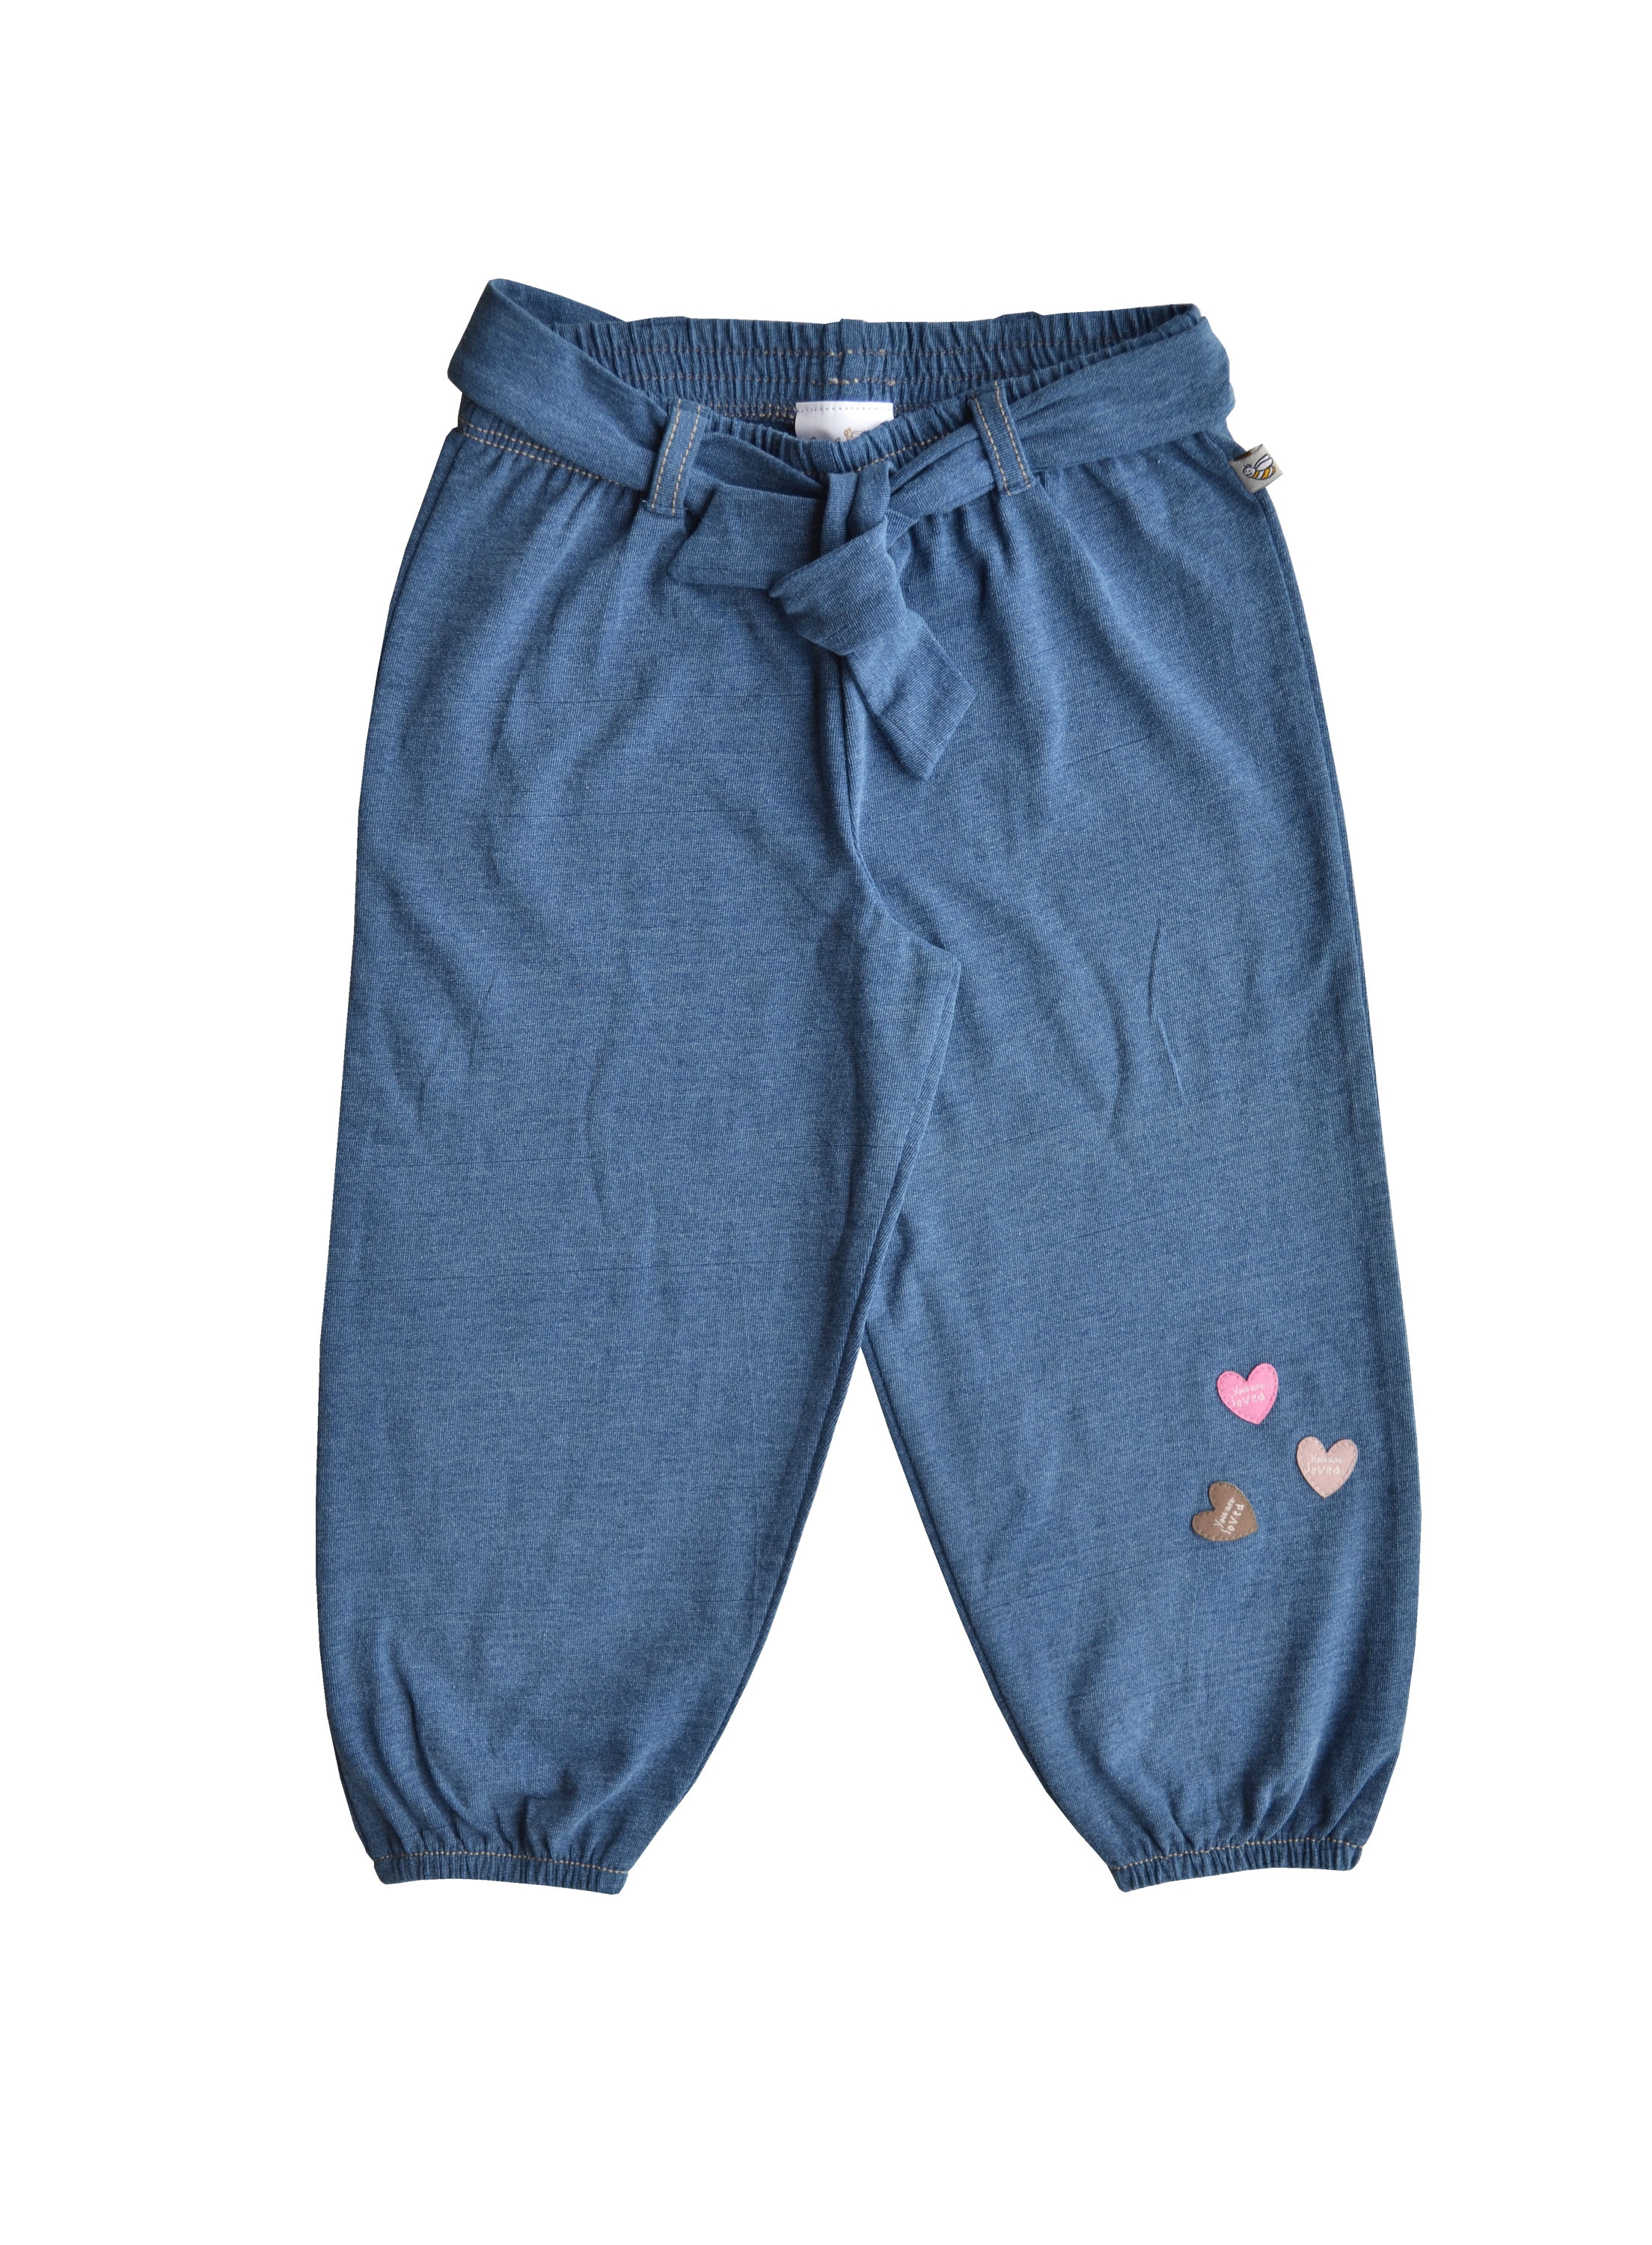 Babeez | Baby Girl Denim Pant with Belt and Applique (90% Cotton 5% Elasthan) undefined